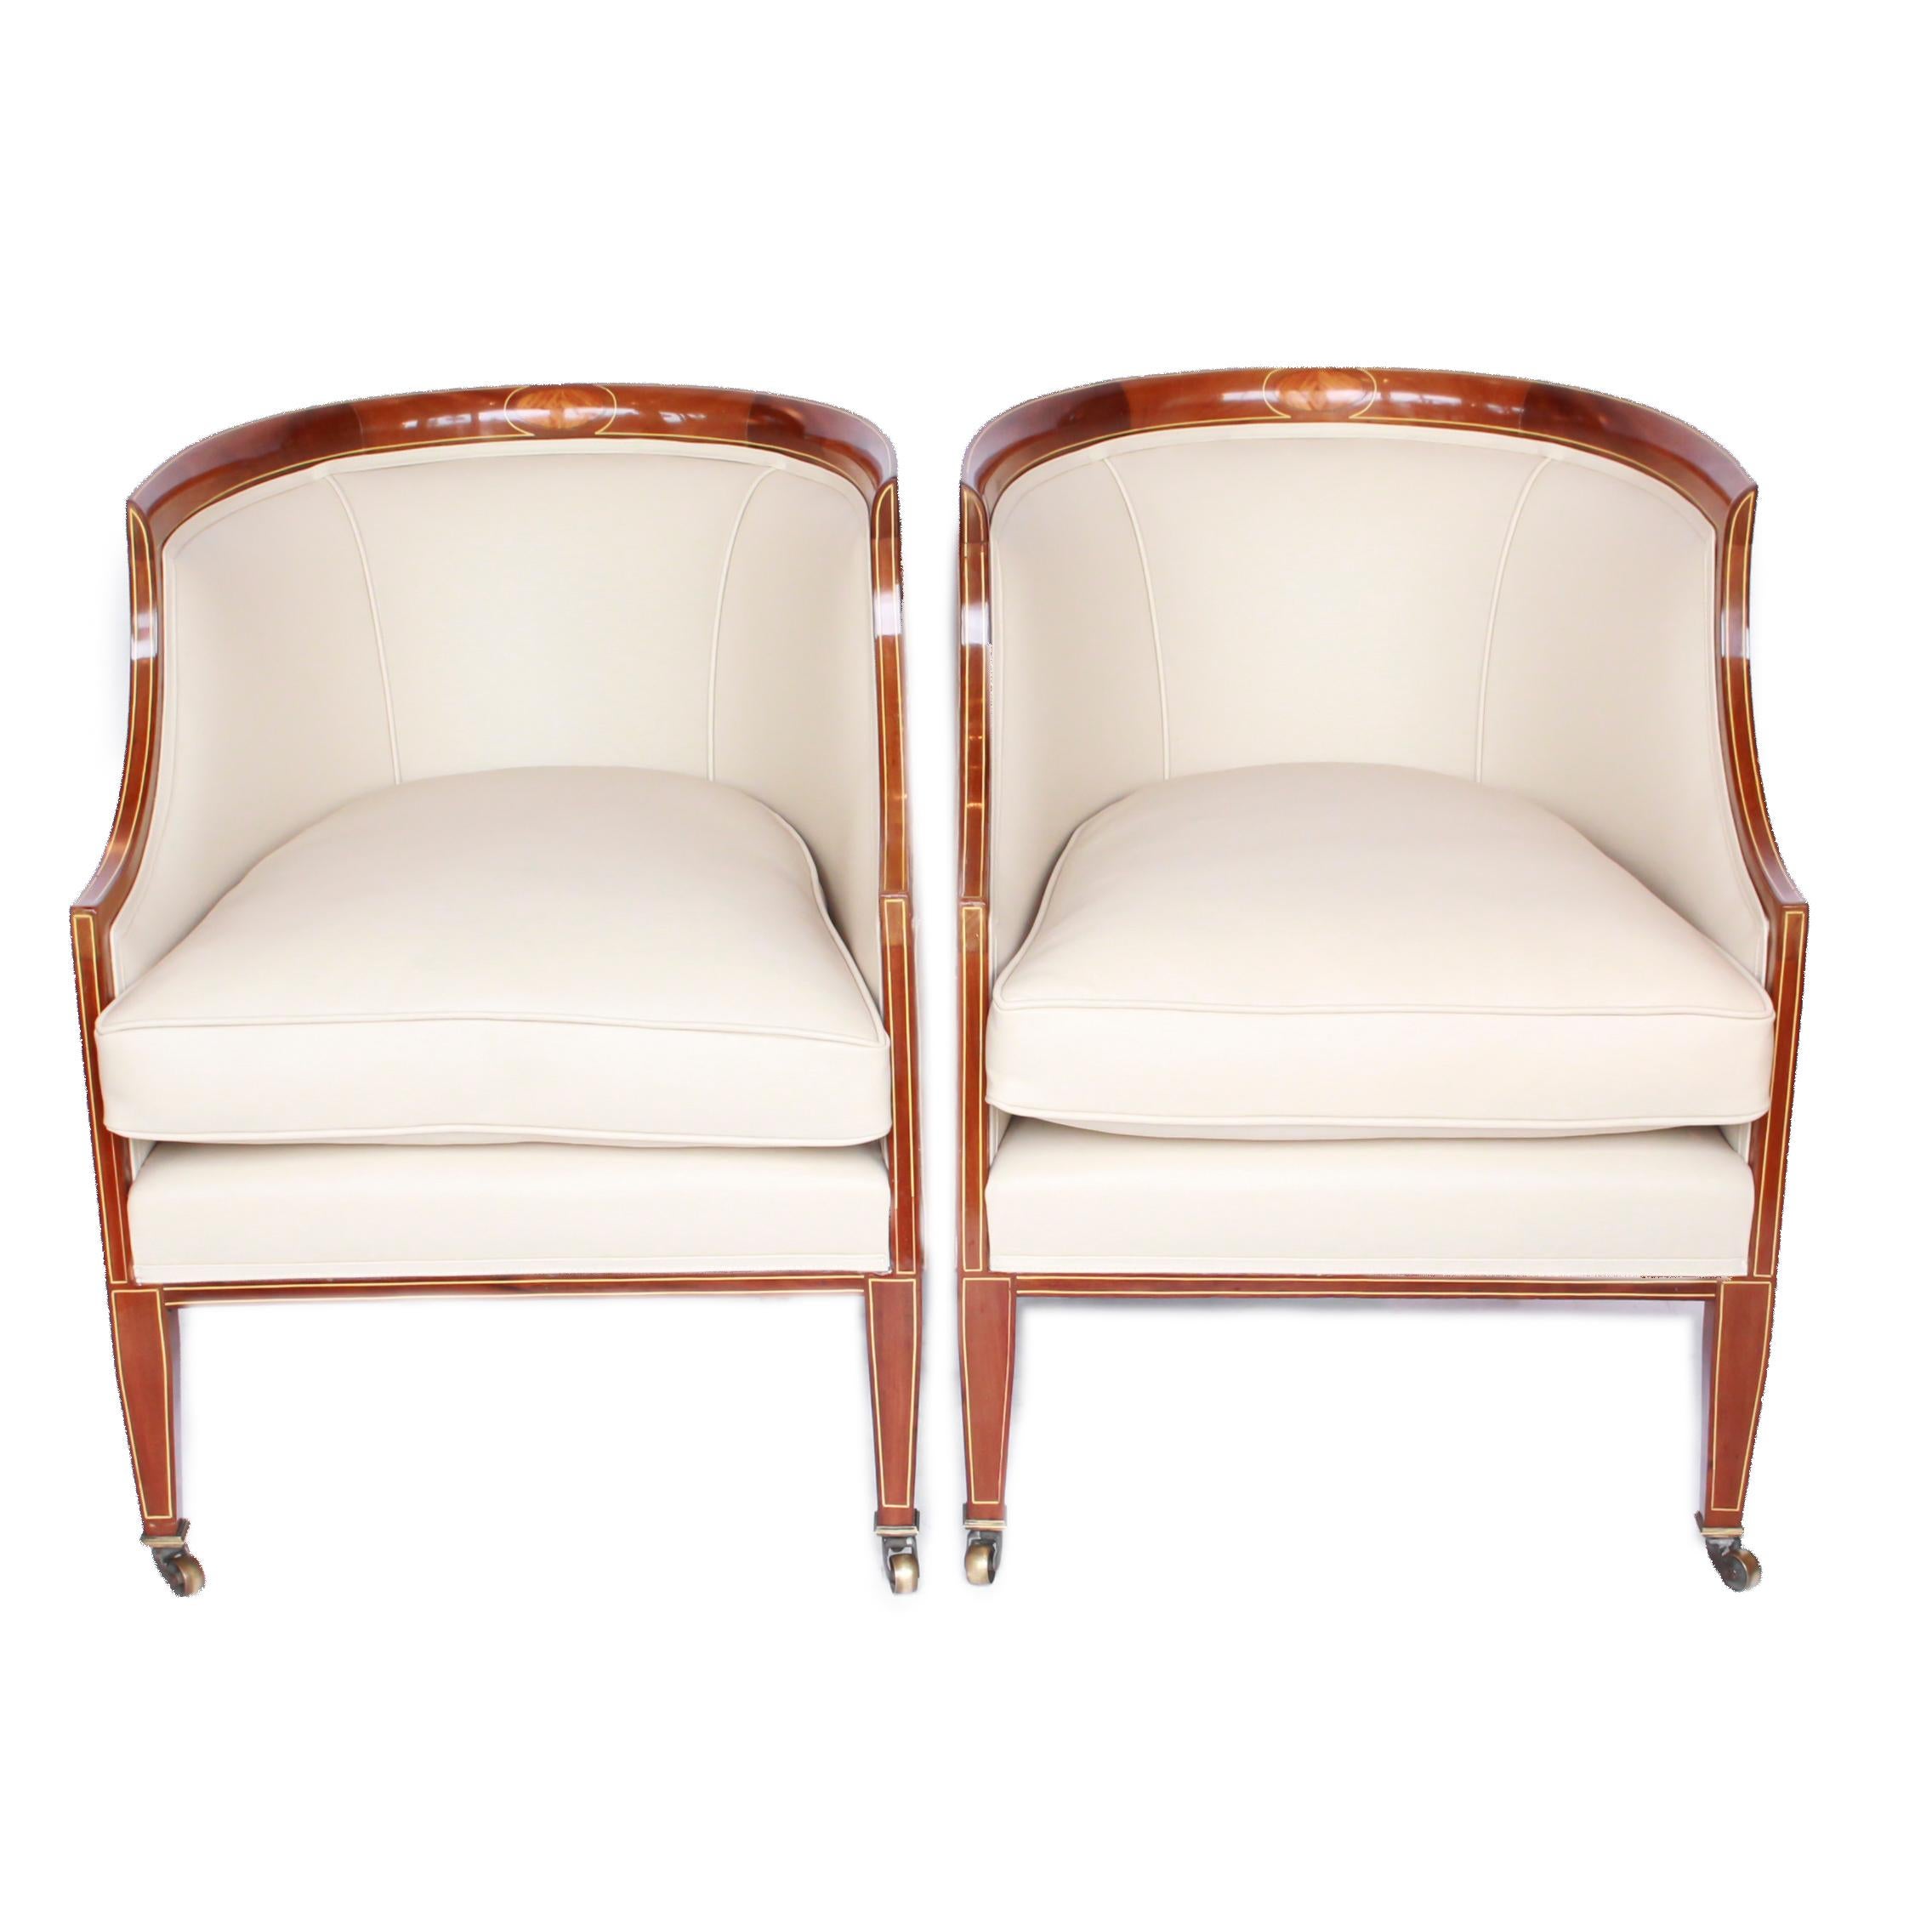 A pair of mahogany, library tub chairs. Re-upholstered in cream leather. Satin wood and boxwood inlay on original brass casters.

Dimensions: H 77cm, W 55cm, seat H 37cm, seat D 55cm

Origin: English

Date: circa 1920

Item no: 2011192.